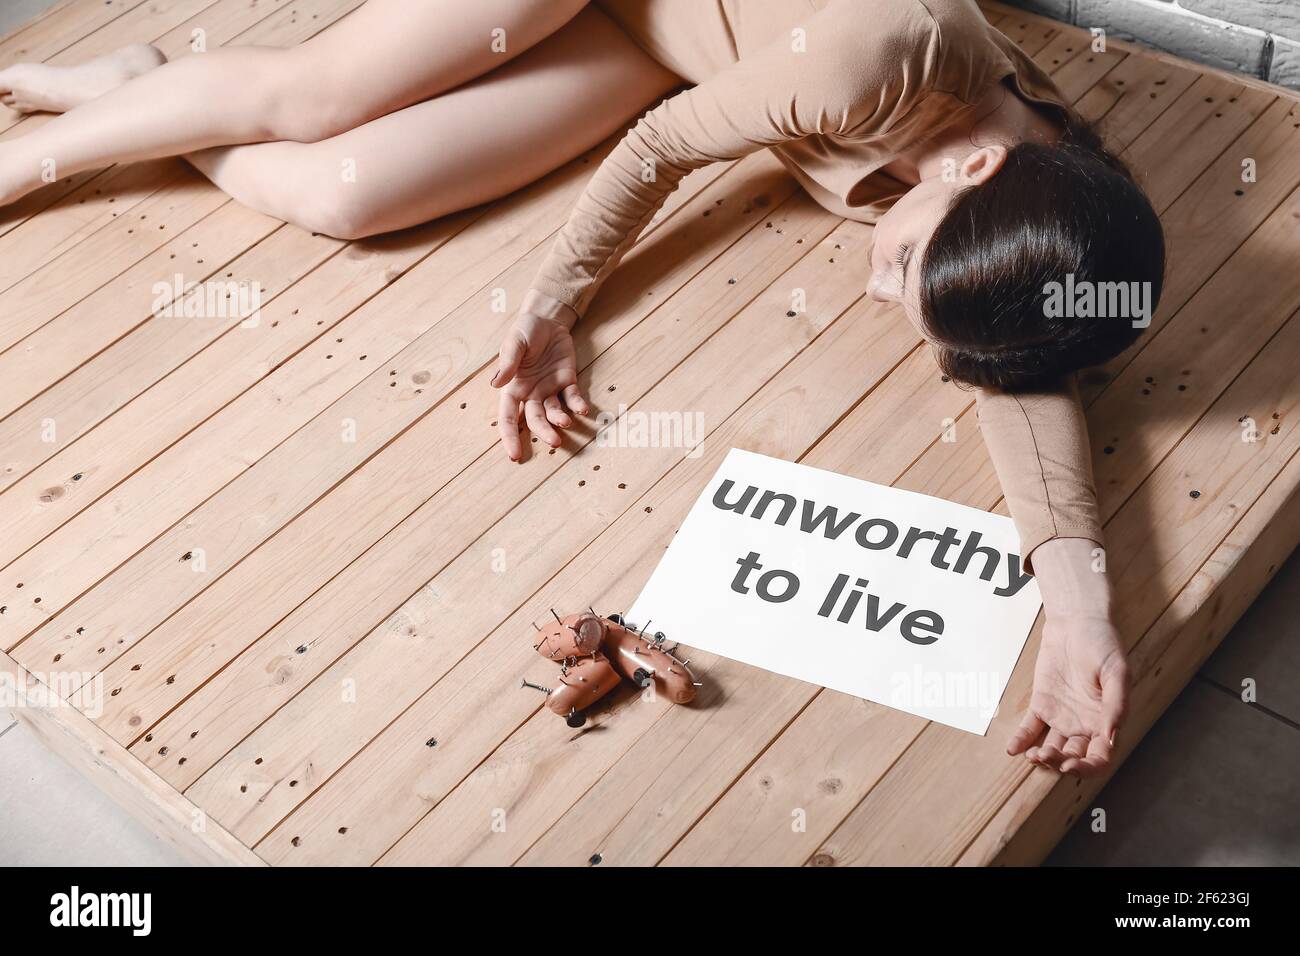 Young woman lying on floor near sausages with nails. Concept of cruelty to animals Stock Photo